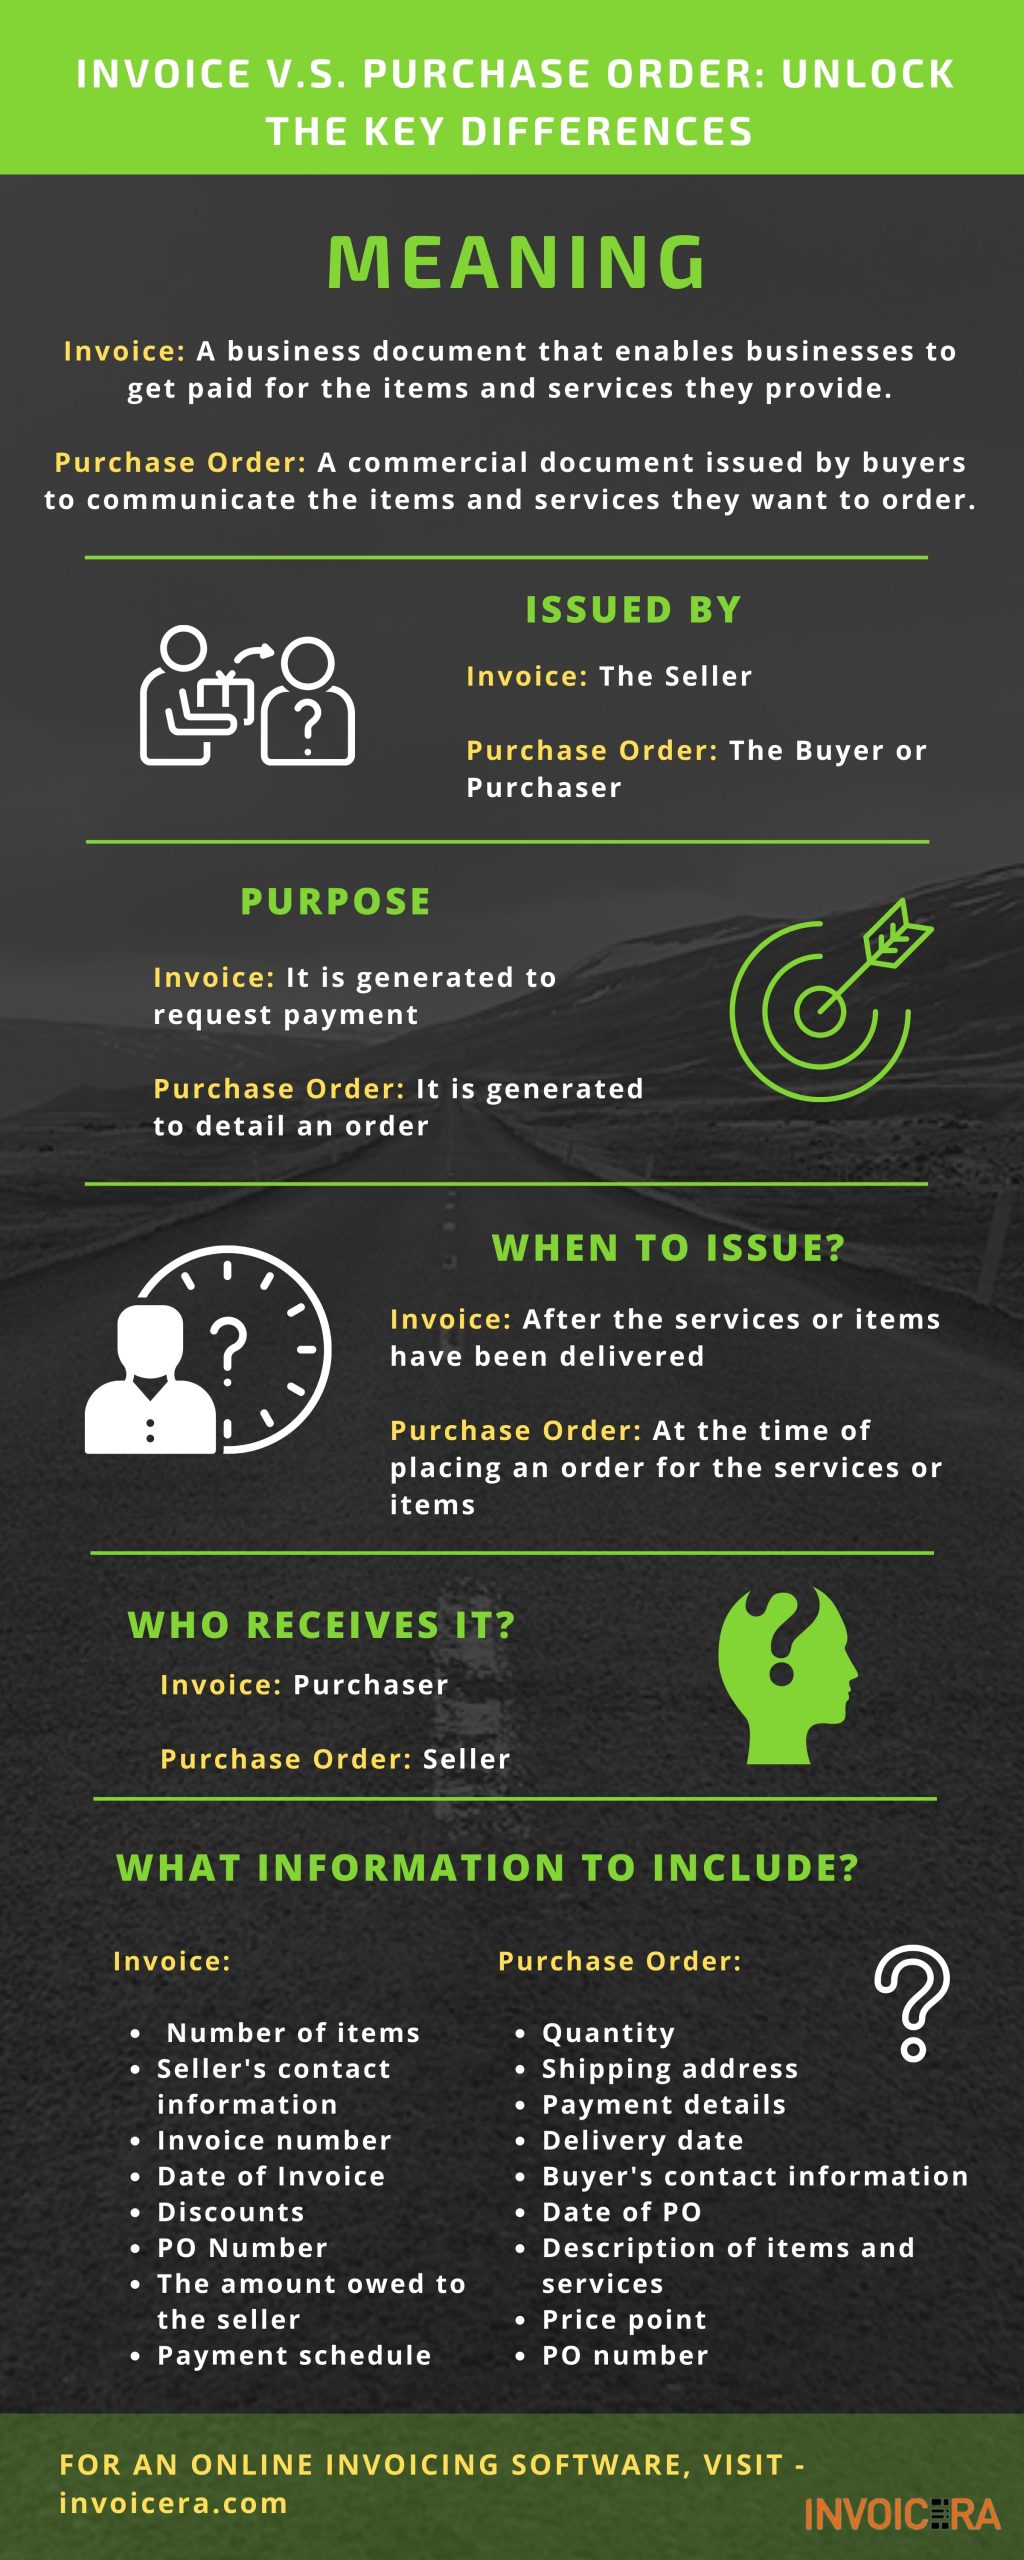 difference between purchase order and invoice